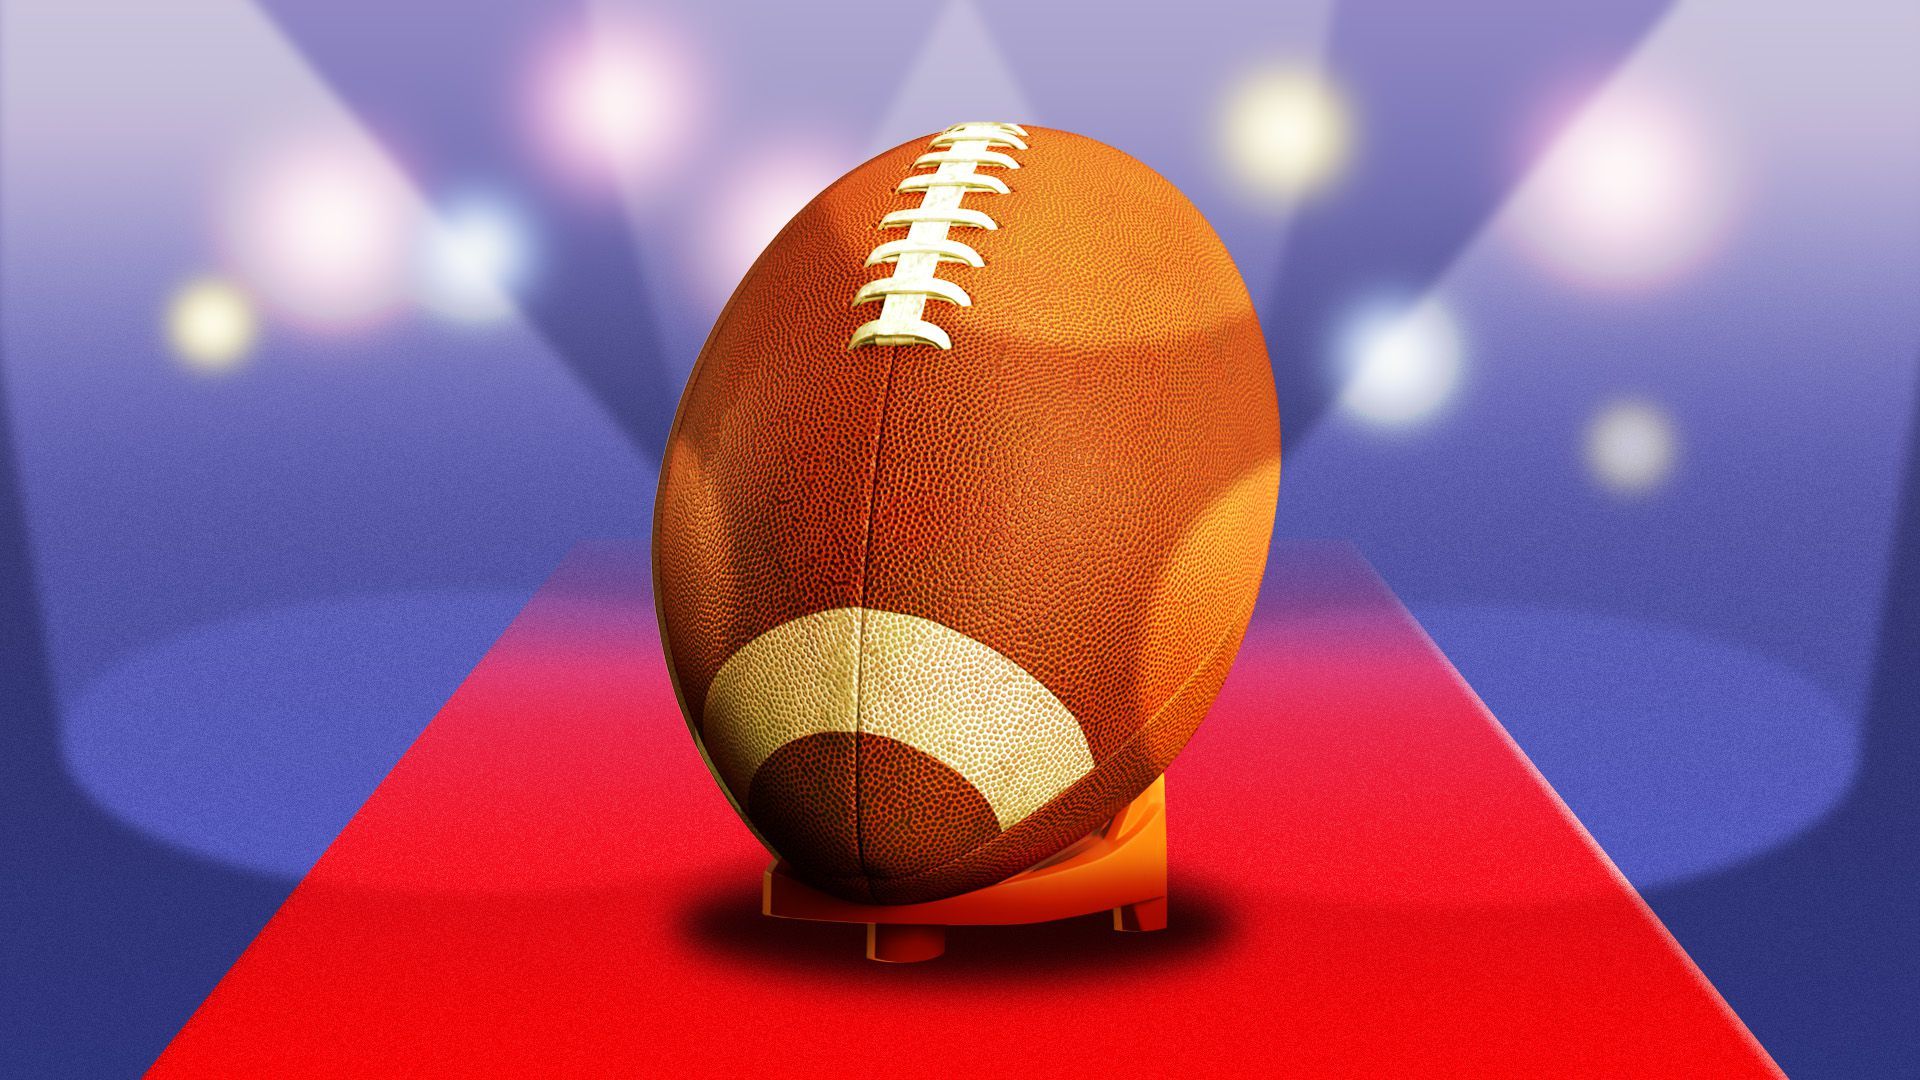 Illustration of a football on a red carpet.